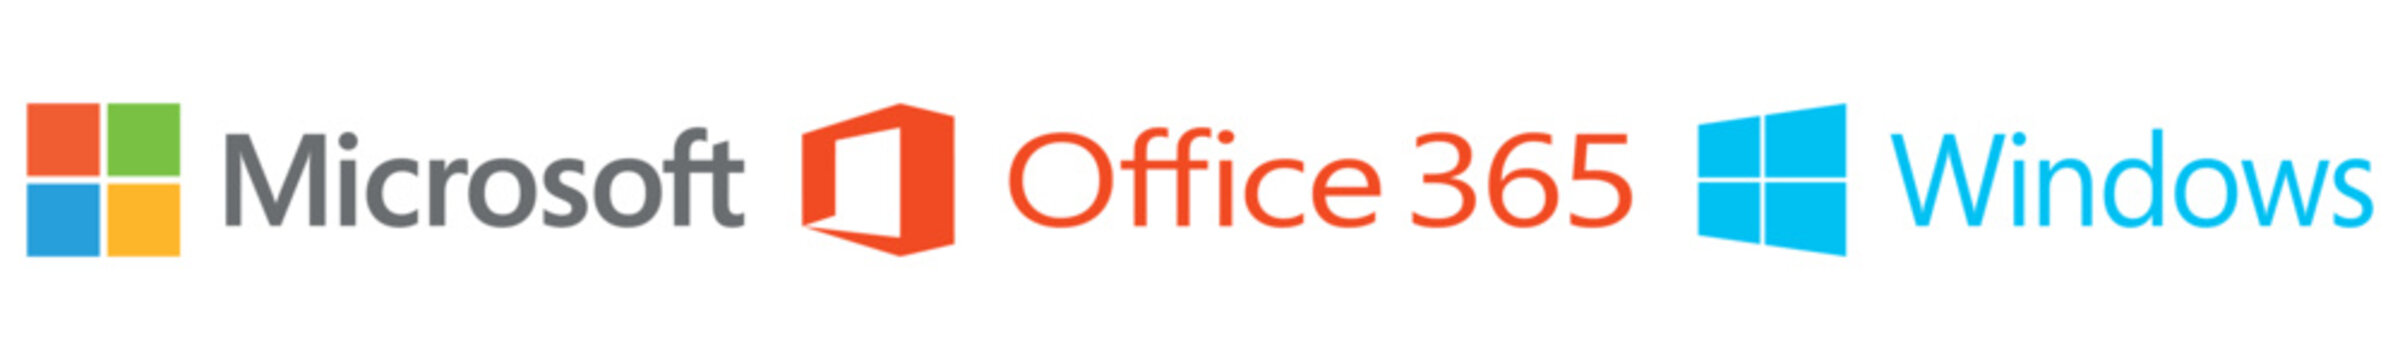 Microsoft, Office 365, Windows buttons logos on transparent background. microsoft icons. PNG image